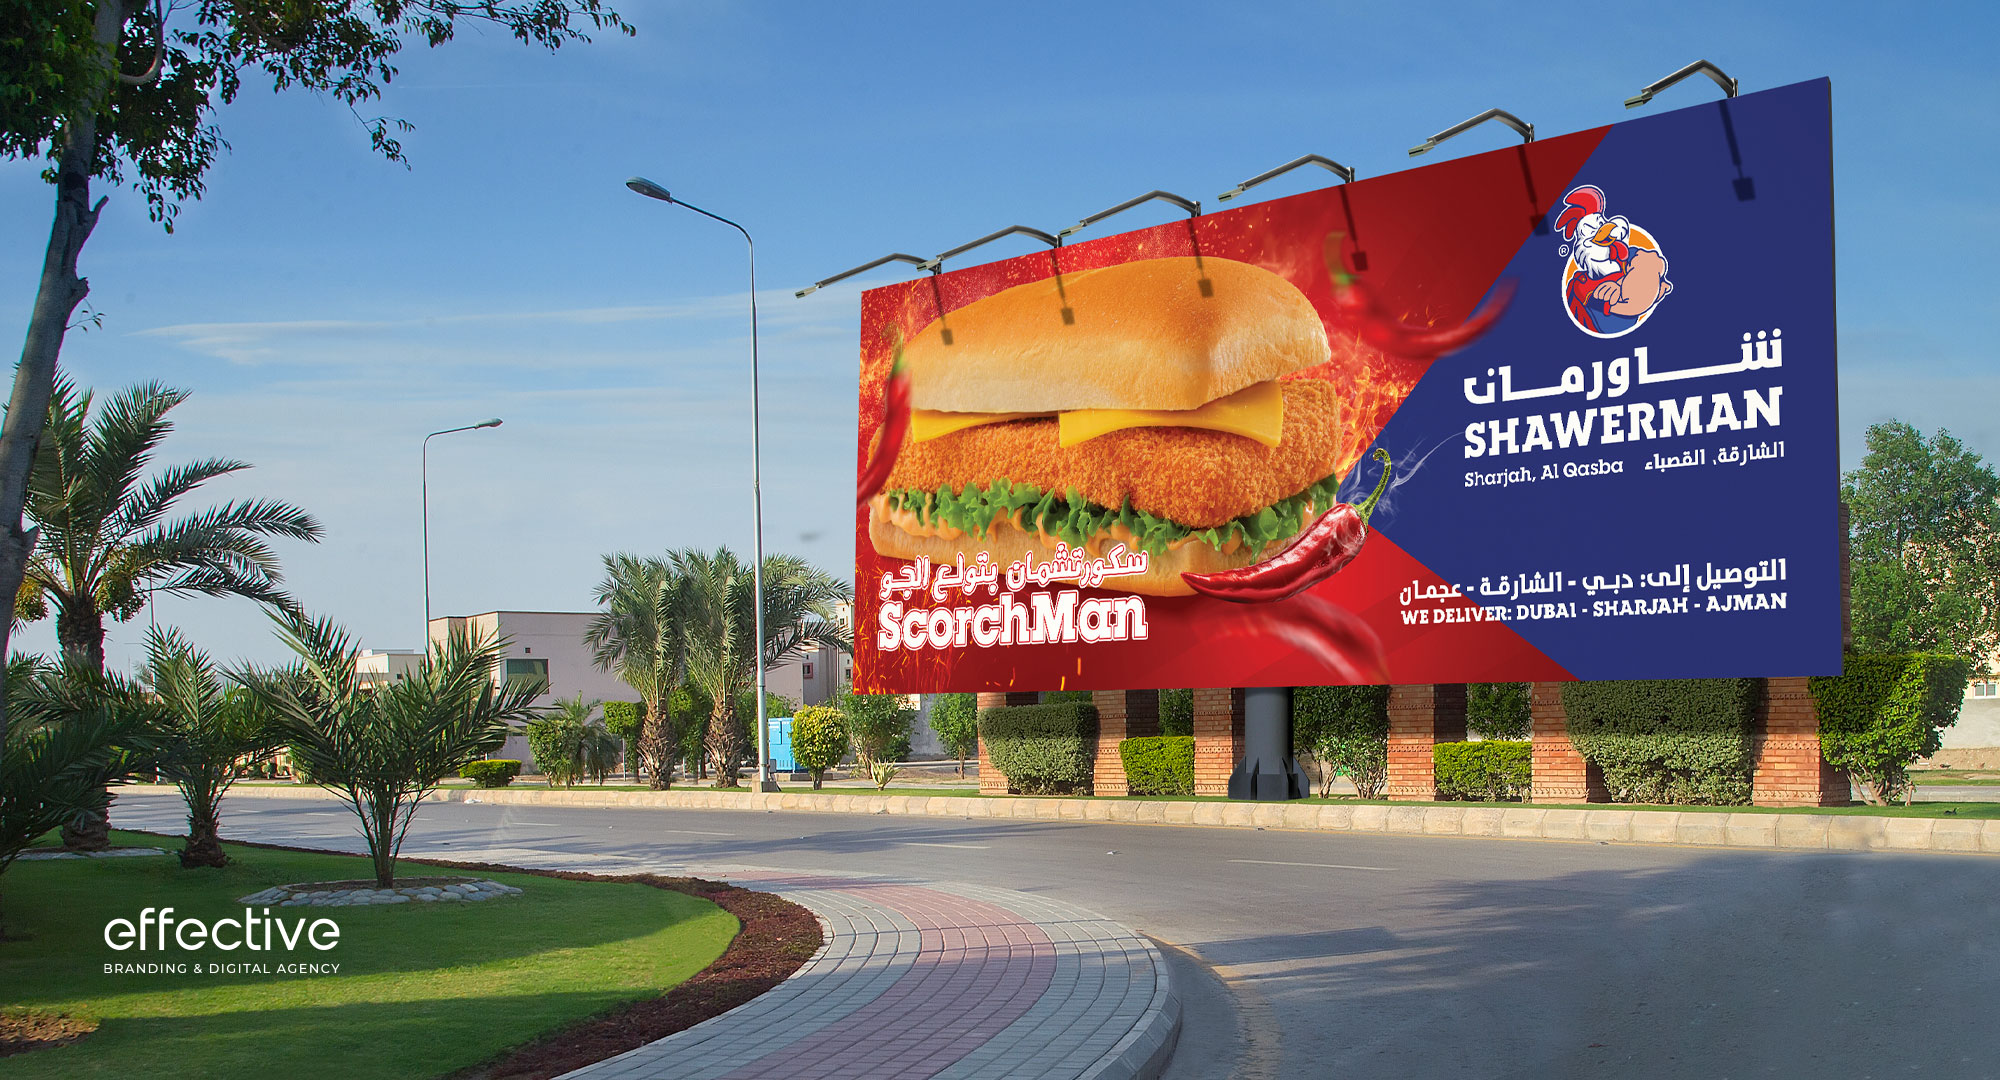 Why Choose Our Billboard Design Services?